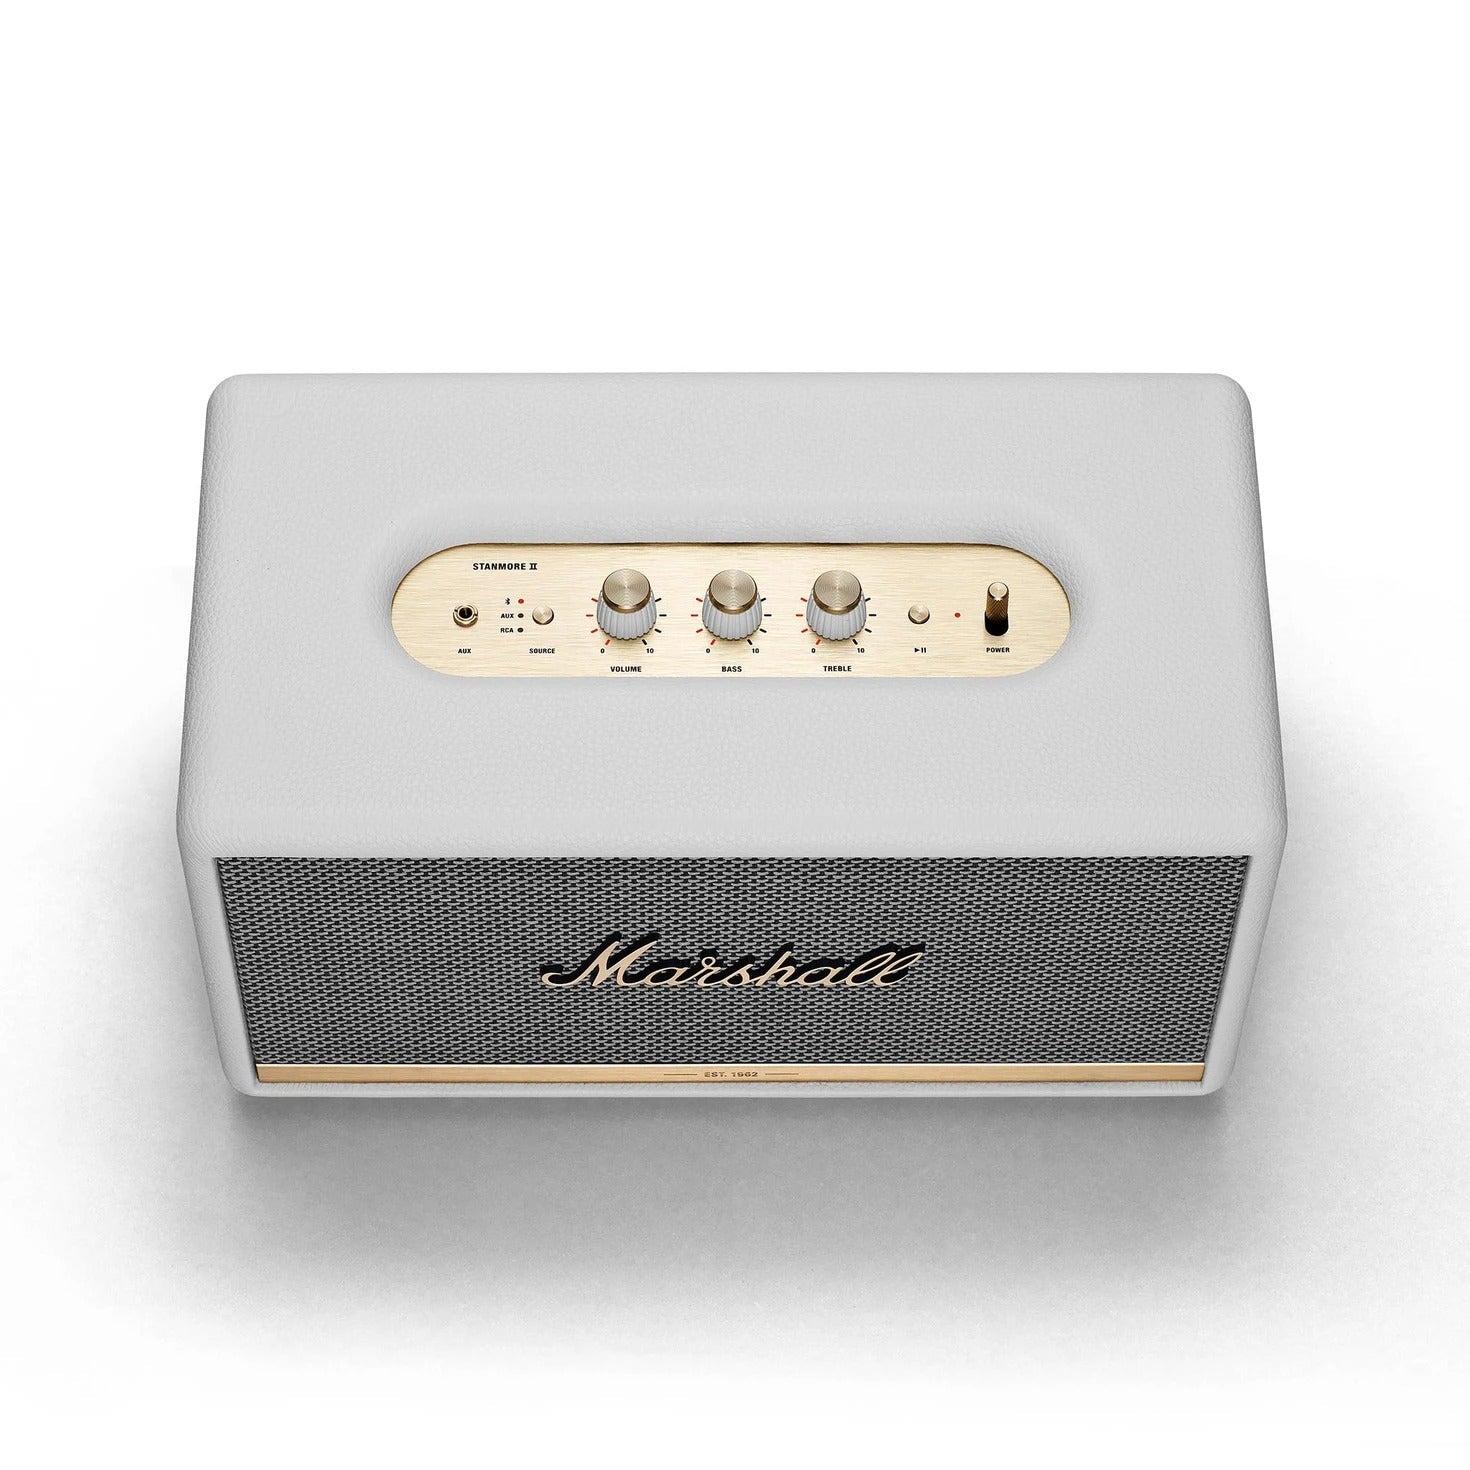 Loa Bluetooth Marshall Stanmore II Voice With Google Assistant-Việt Music